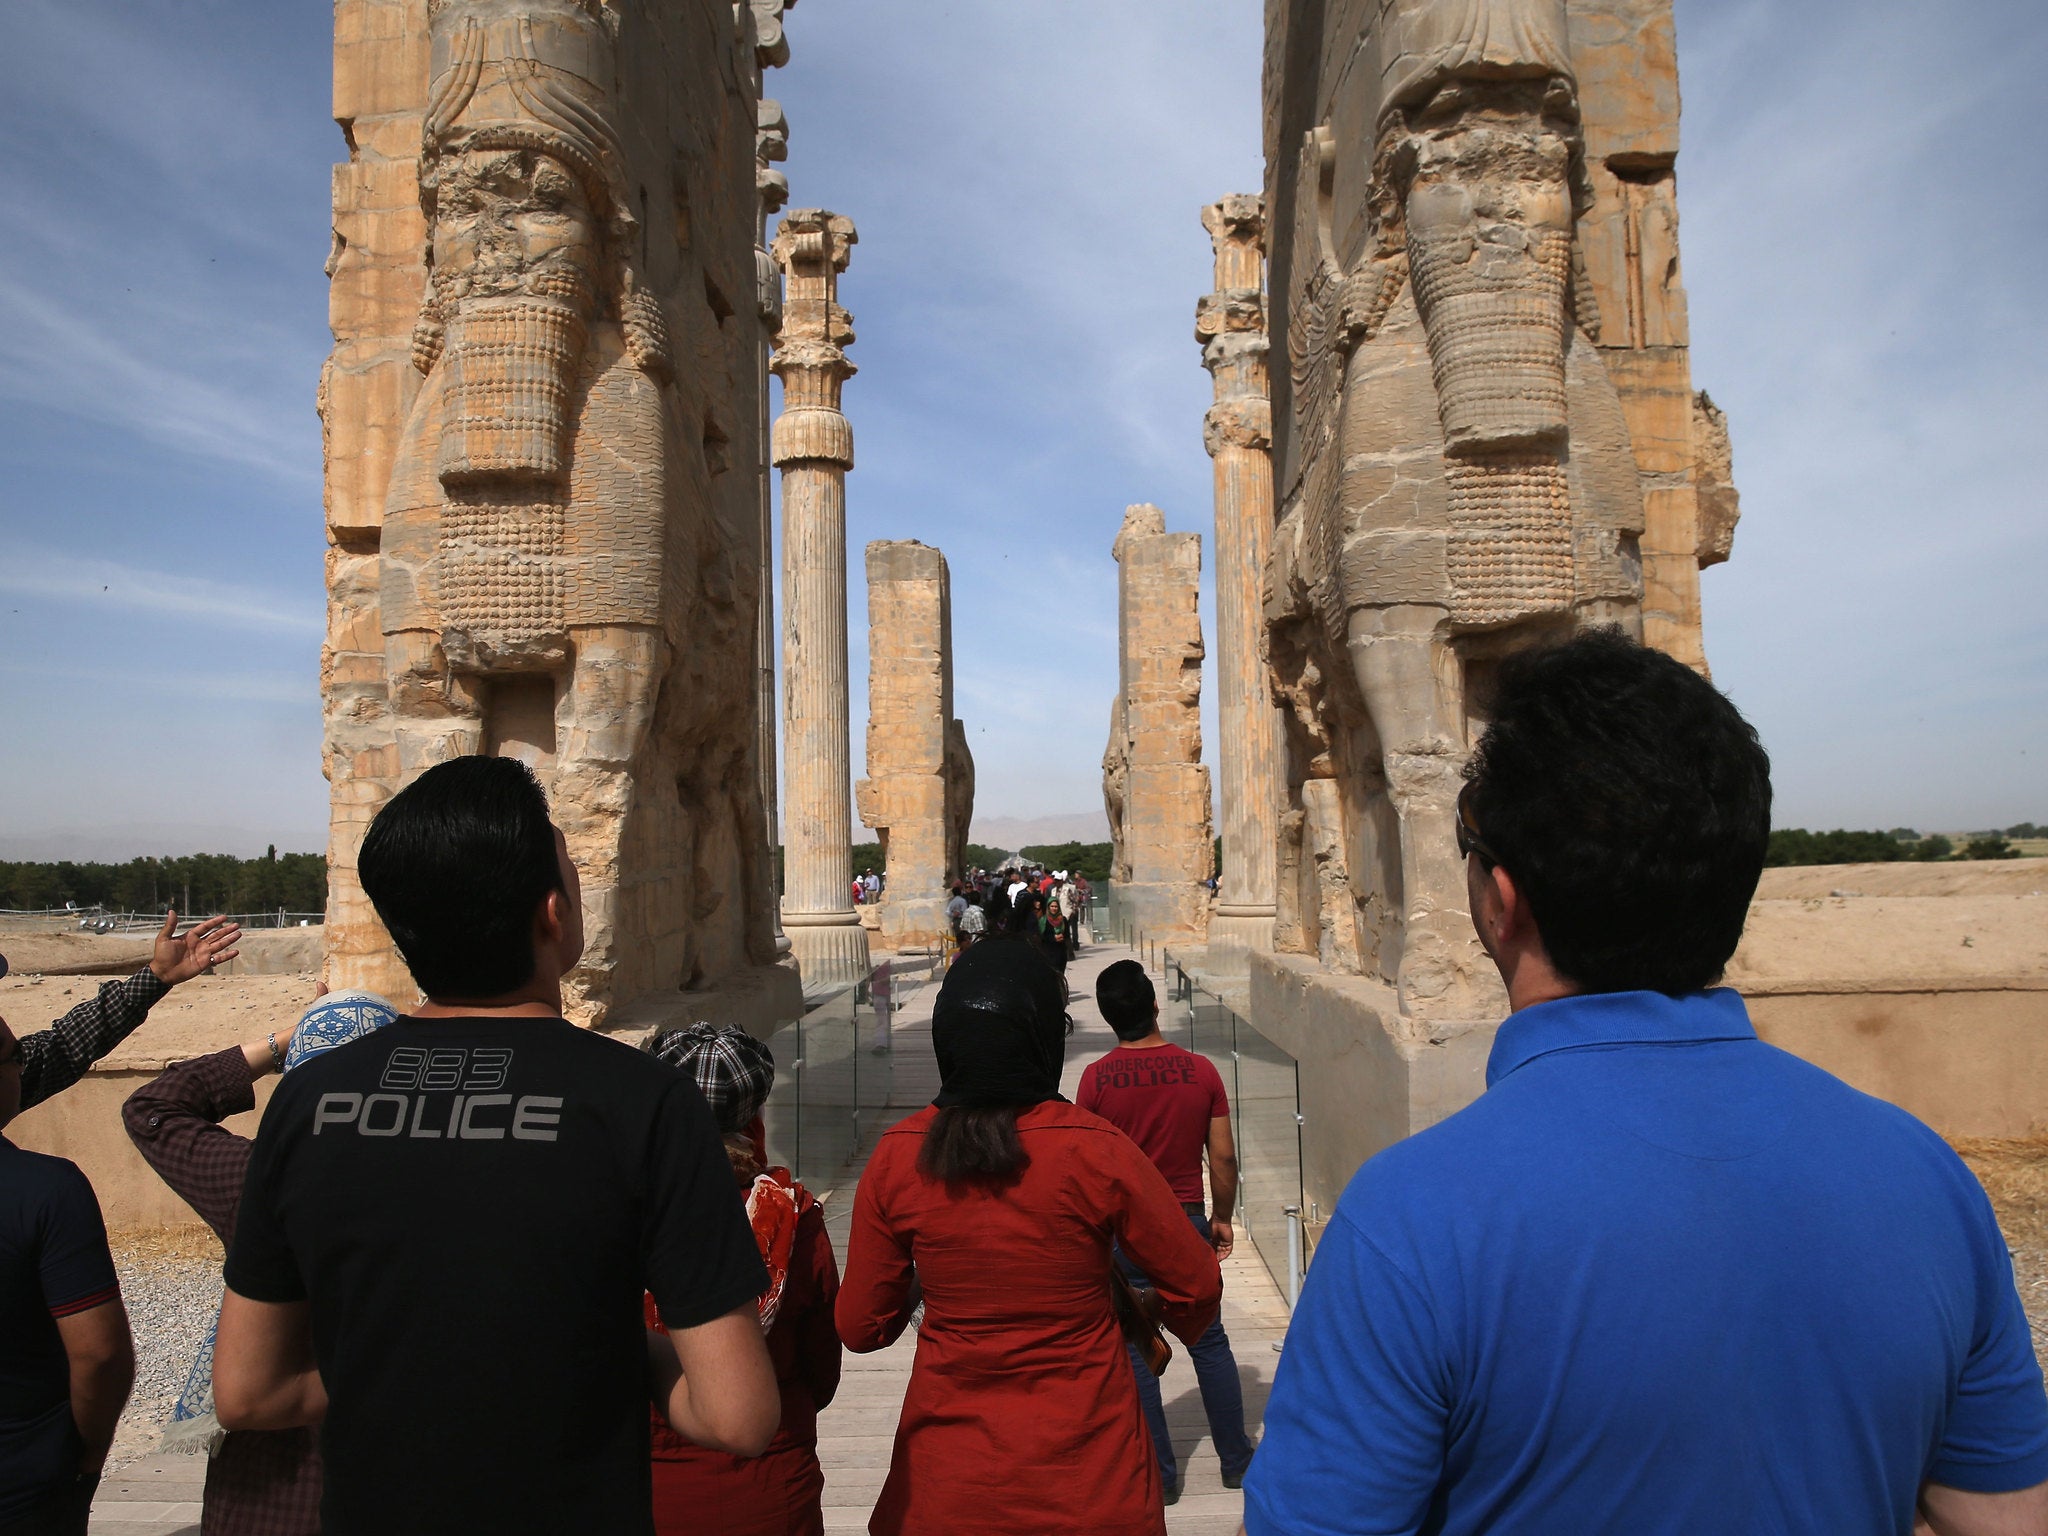 More British tourists may now be attracted by Iranian tourist sites like teh ancient city of Persepolis